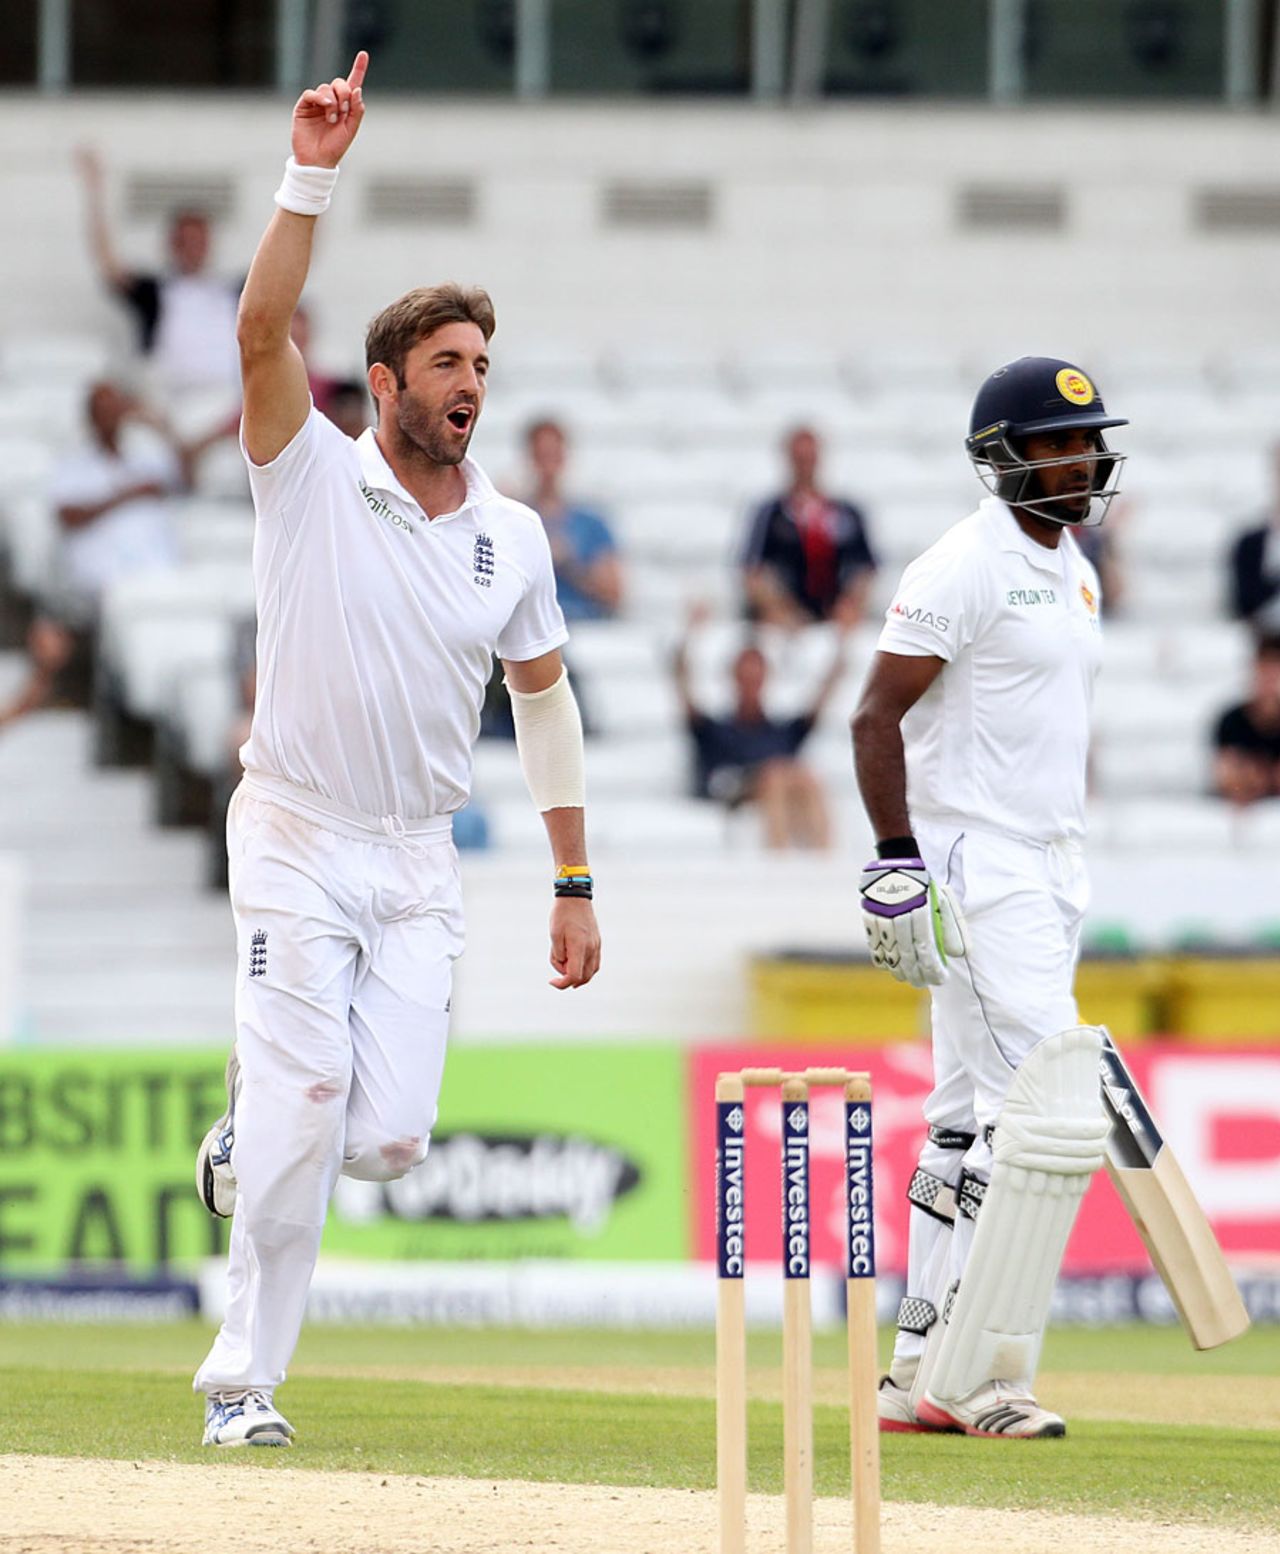 Liam Plunkett bags his second wicket to in two balls, England v Sri Lanka, 2nd Investec Test, Headingley, 4th day, June 23, 2014